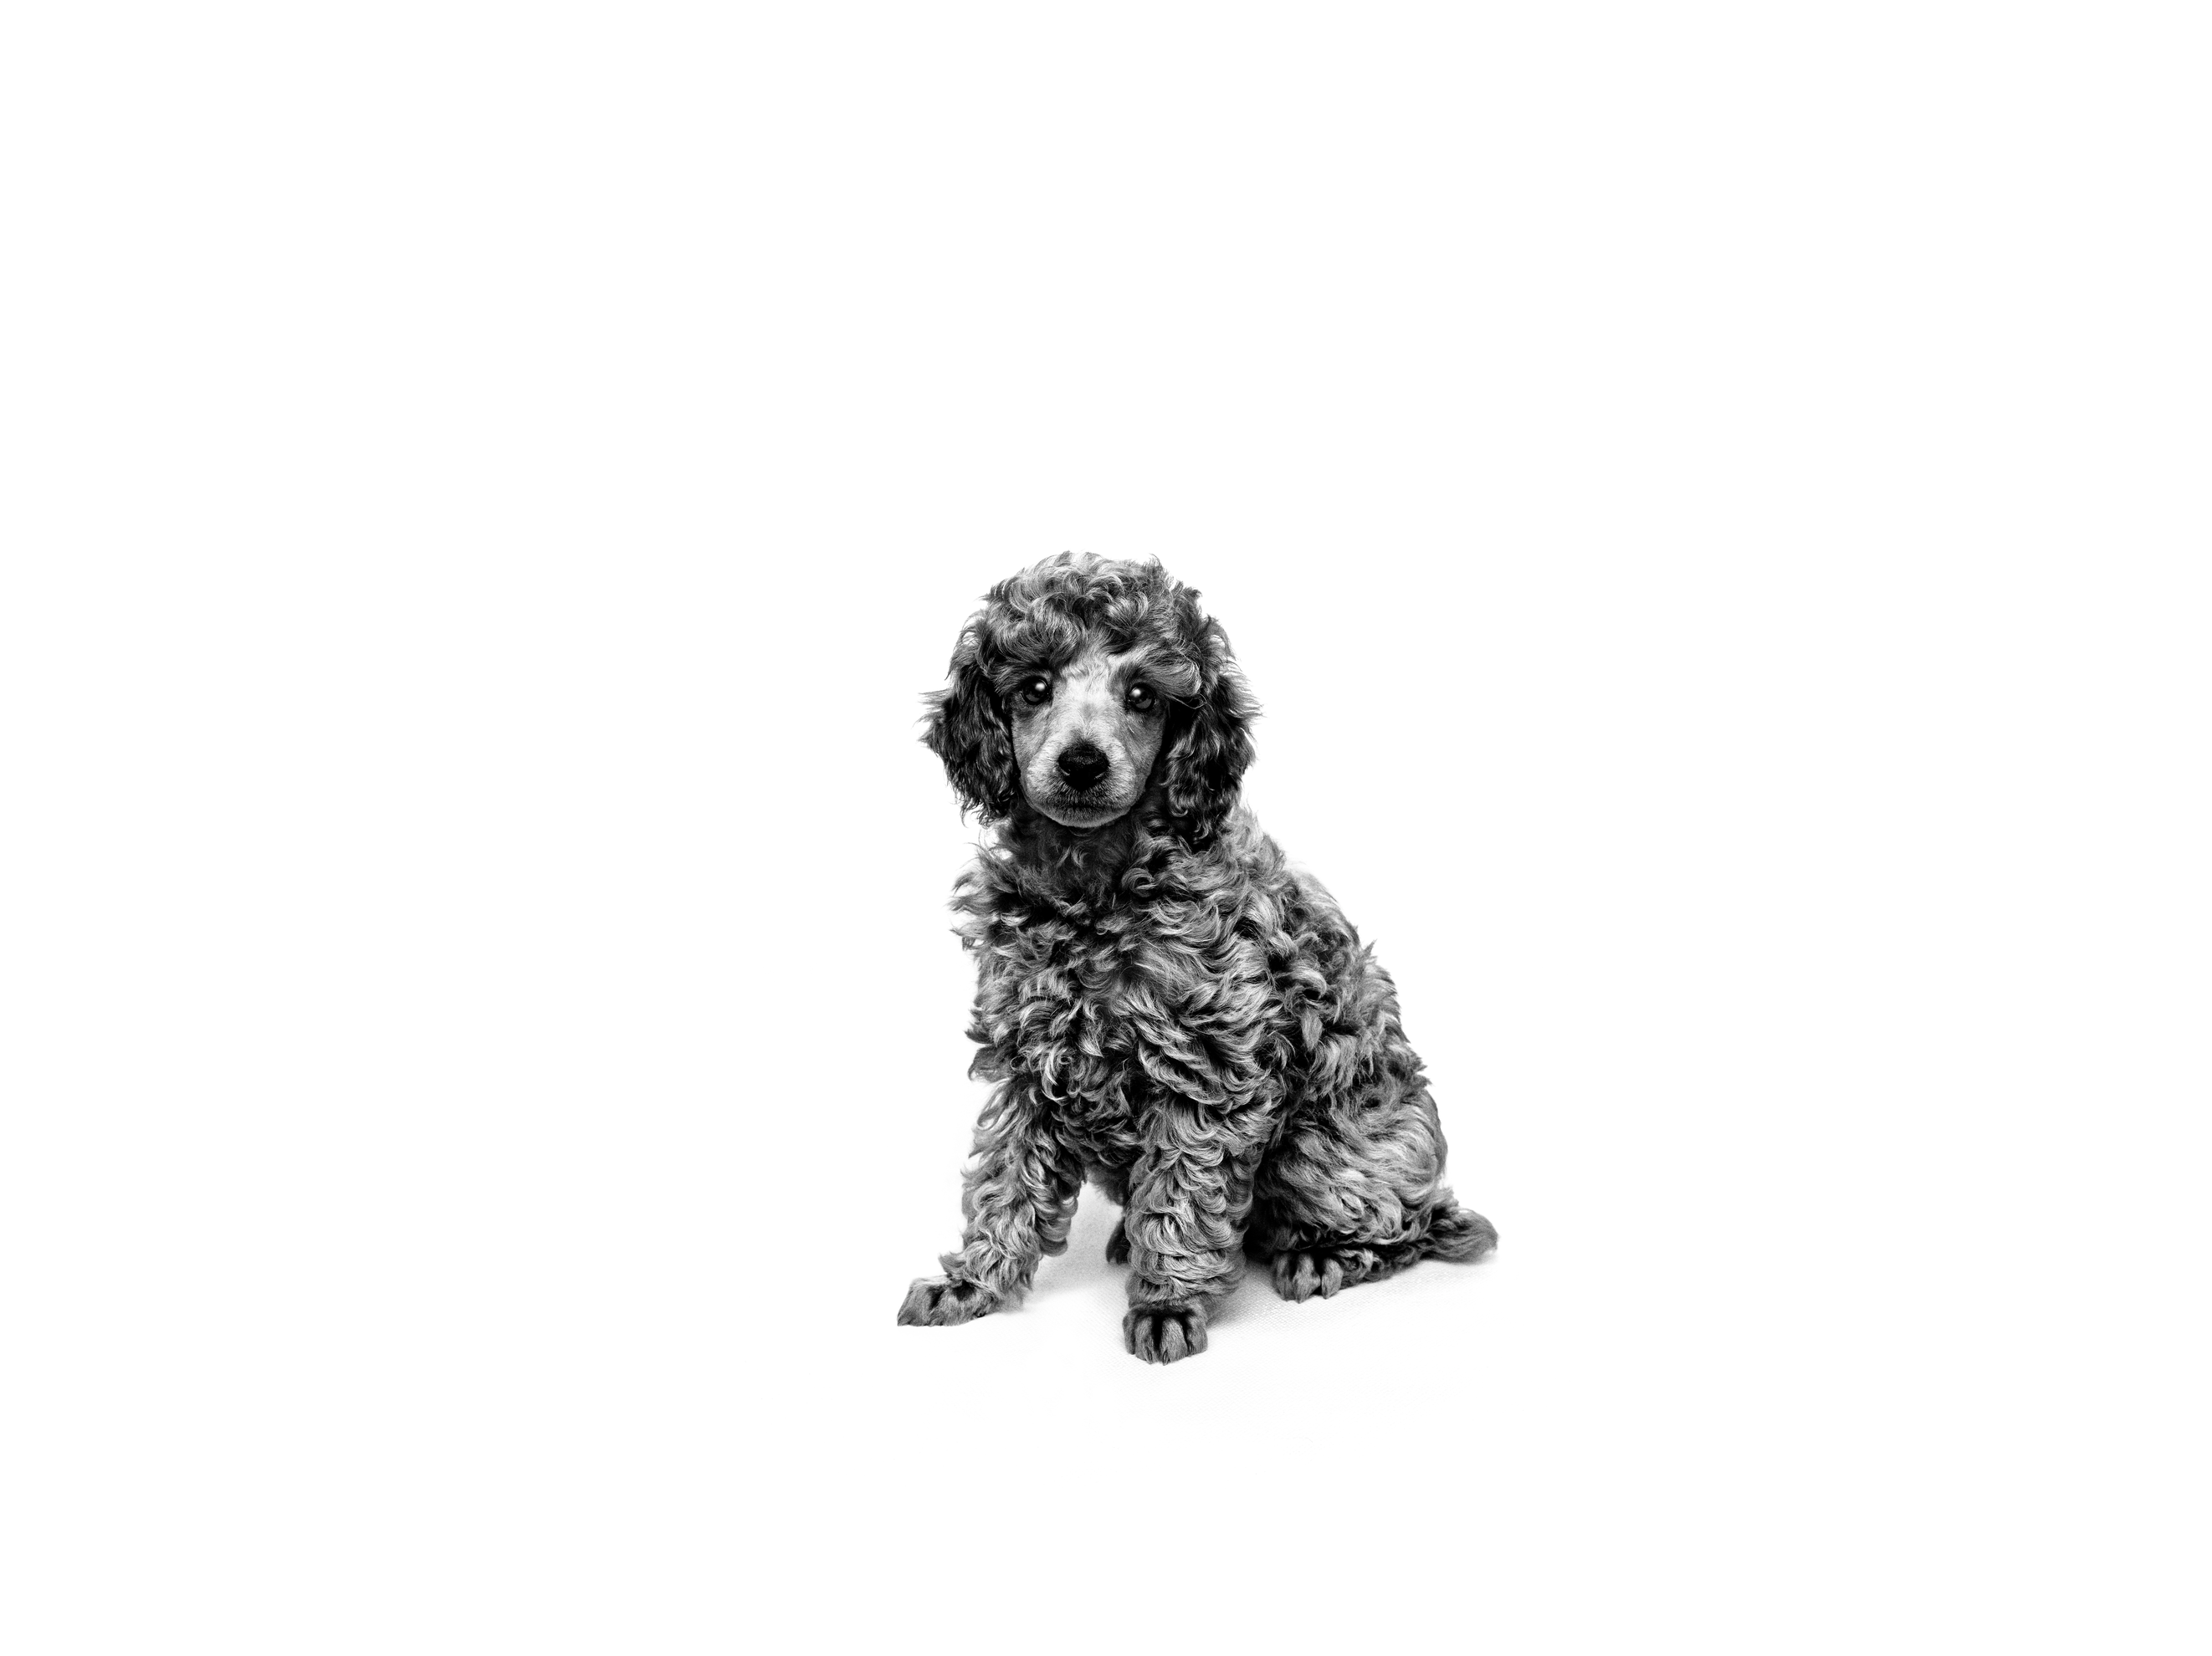 Poodle puppy sitting in black and white on a white background